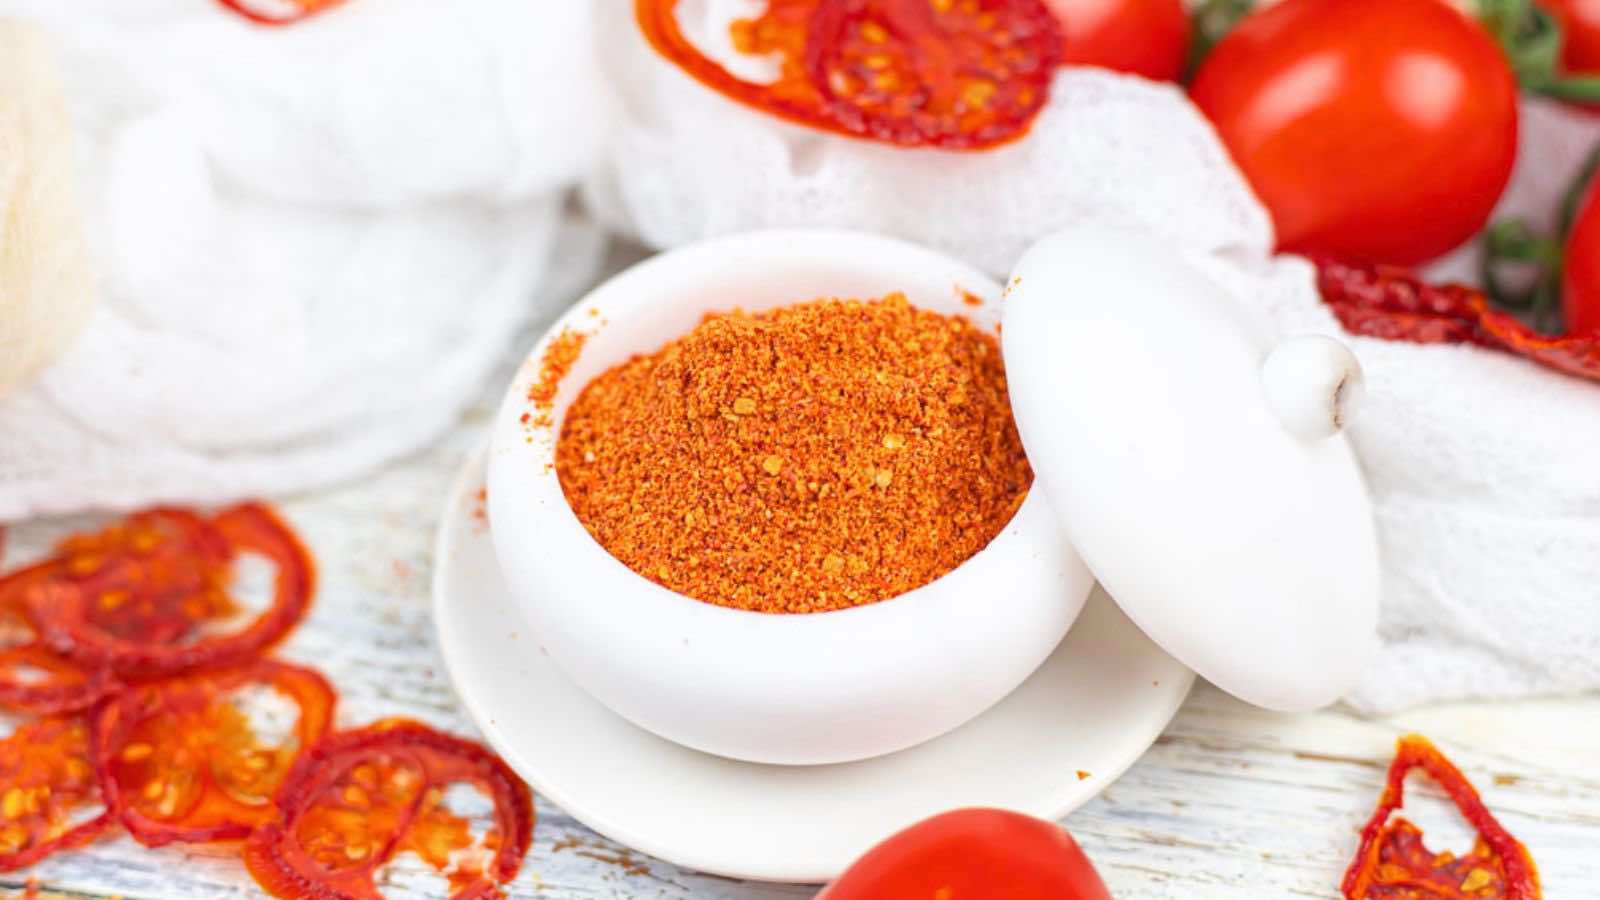 Ground tomato powder in a white bowl surrounded by dried and fresh tomatoes on a rustic wooden table.